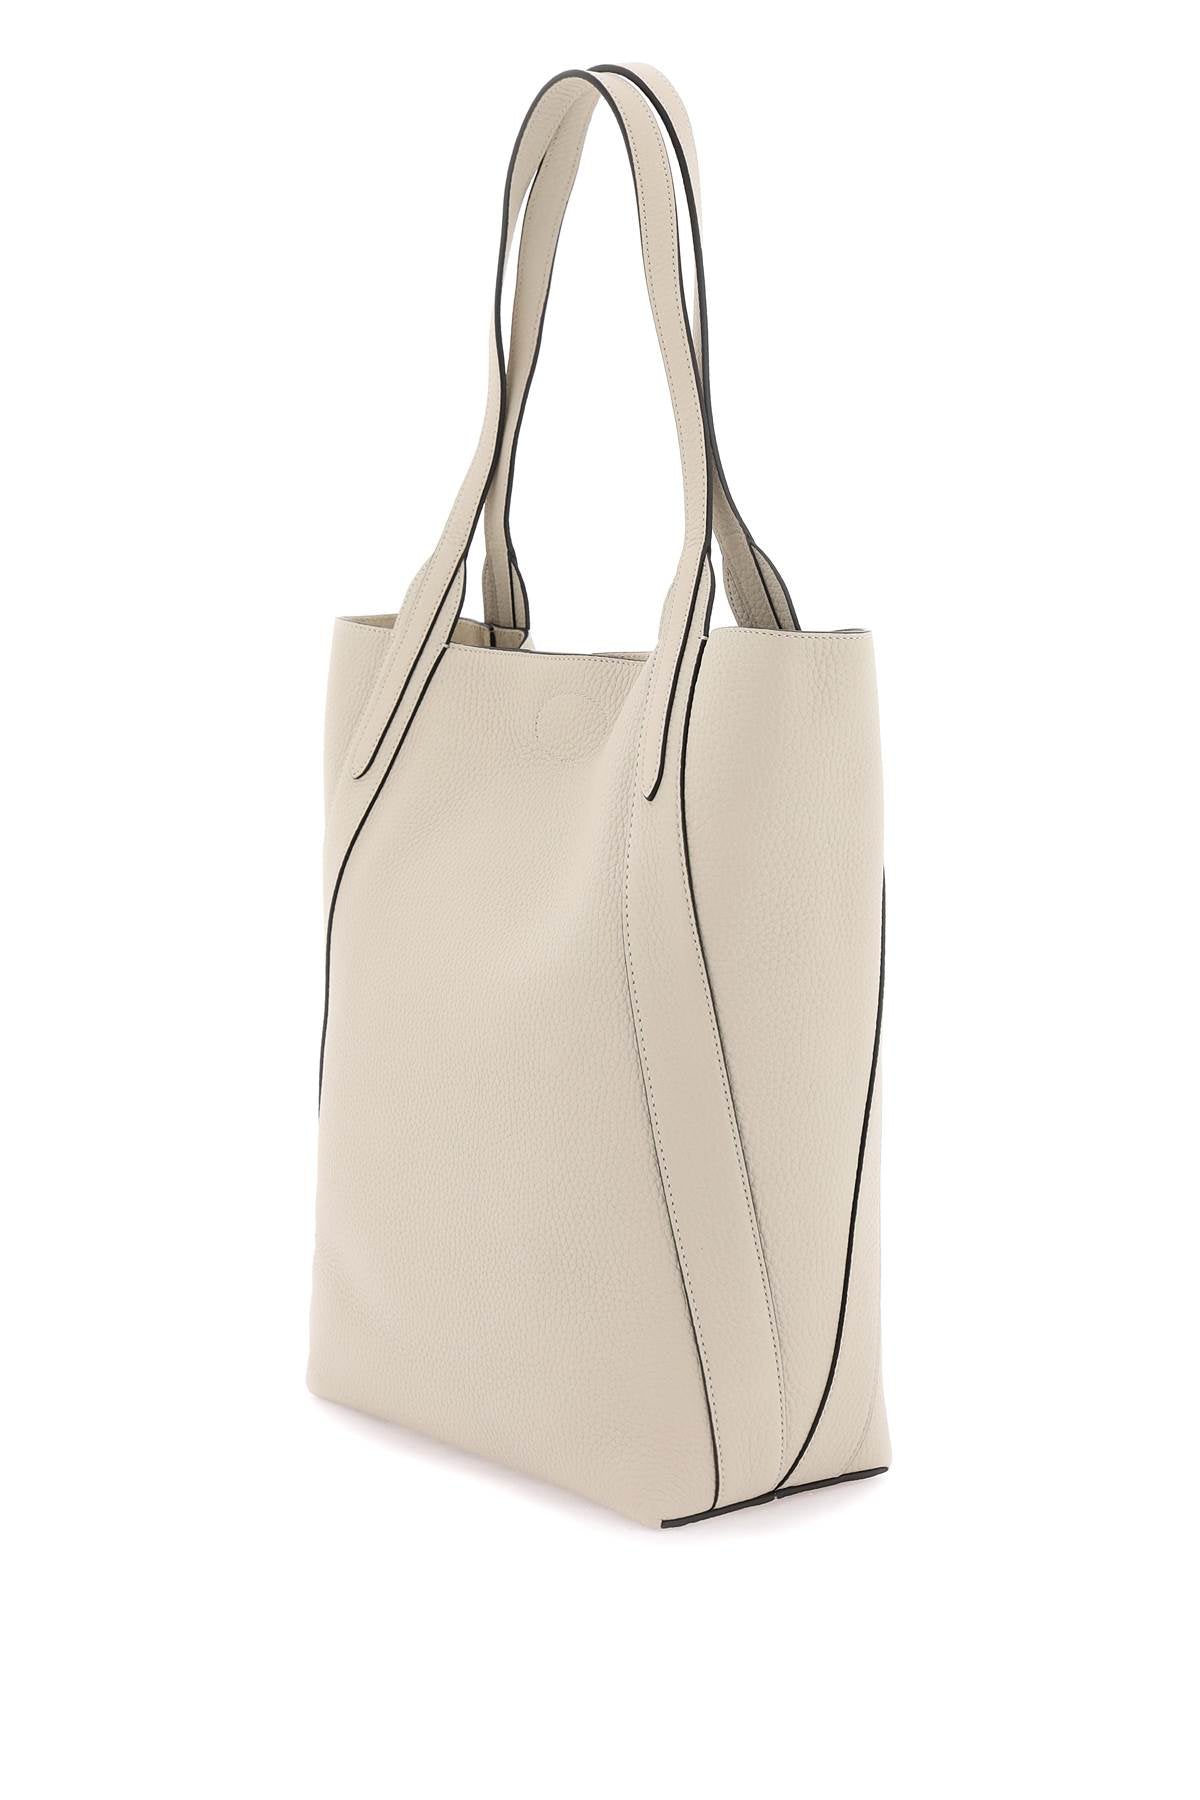 Shop Mulberry Grained Leather Bayswater Tote Handbag For Women In Grey